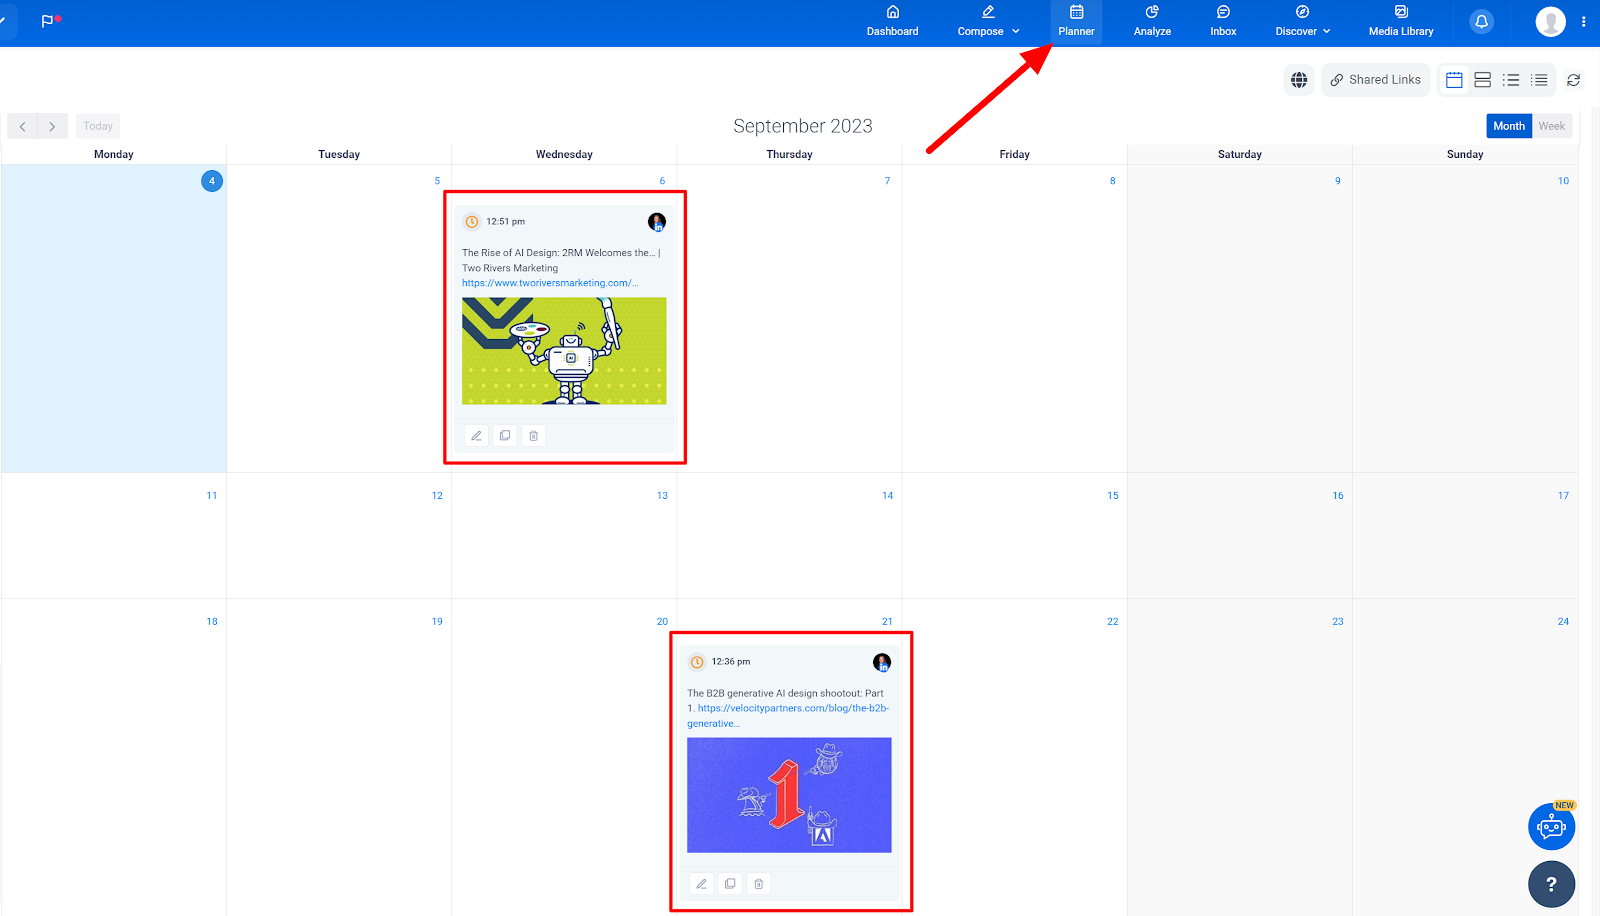 Two posts scheduled in the content calendar using ContentStudio.